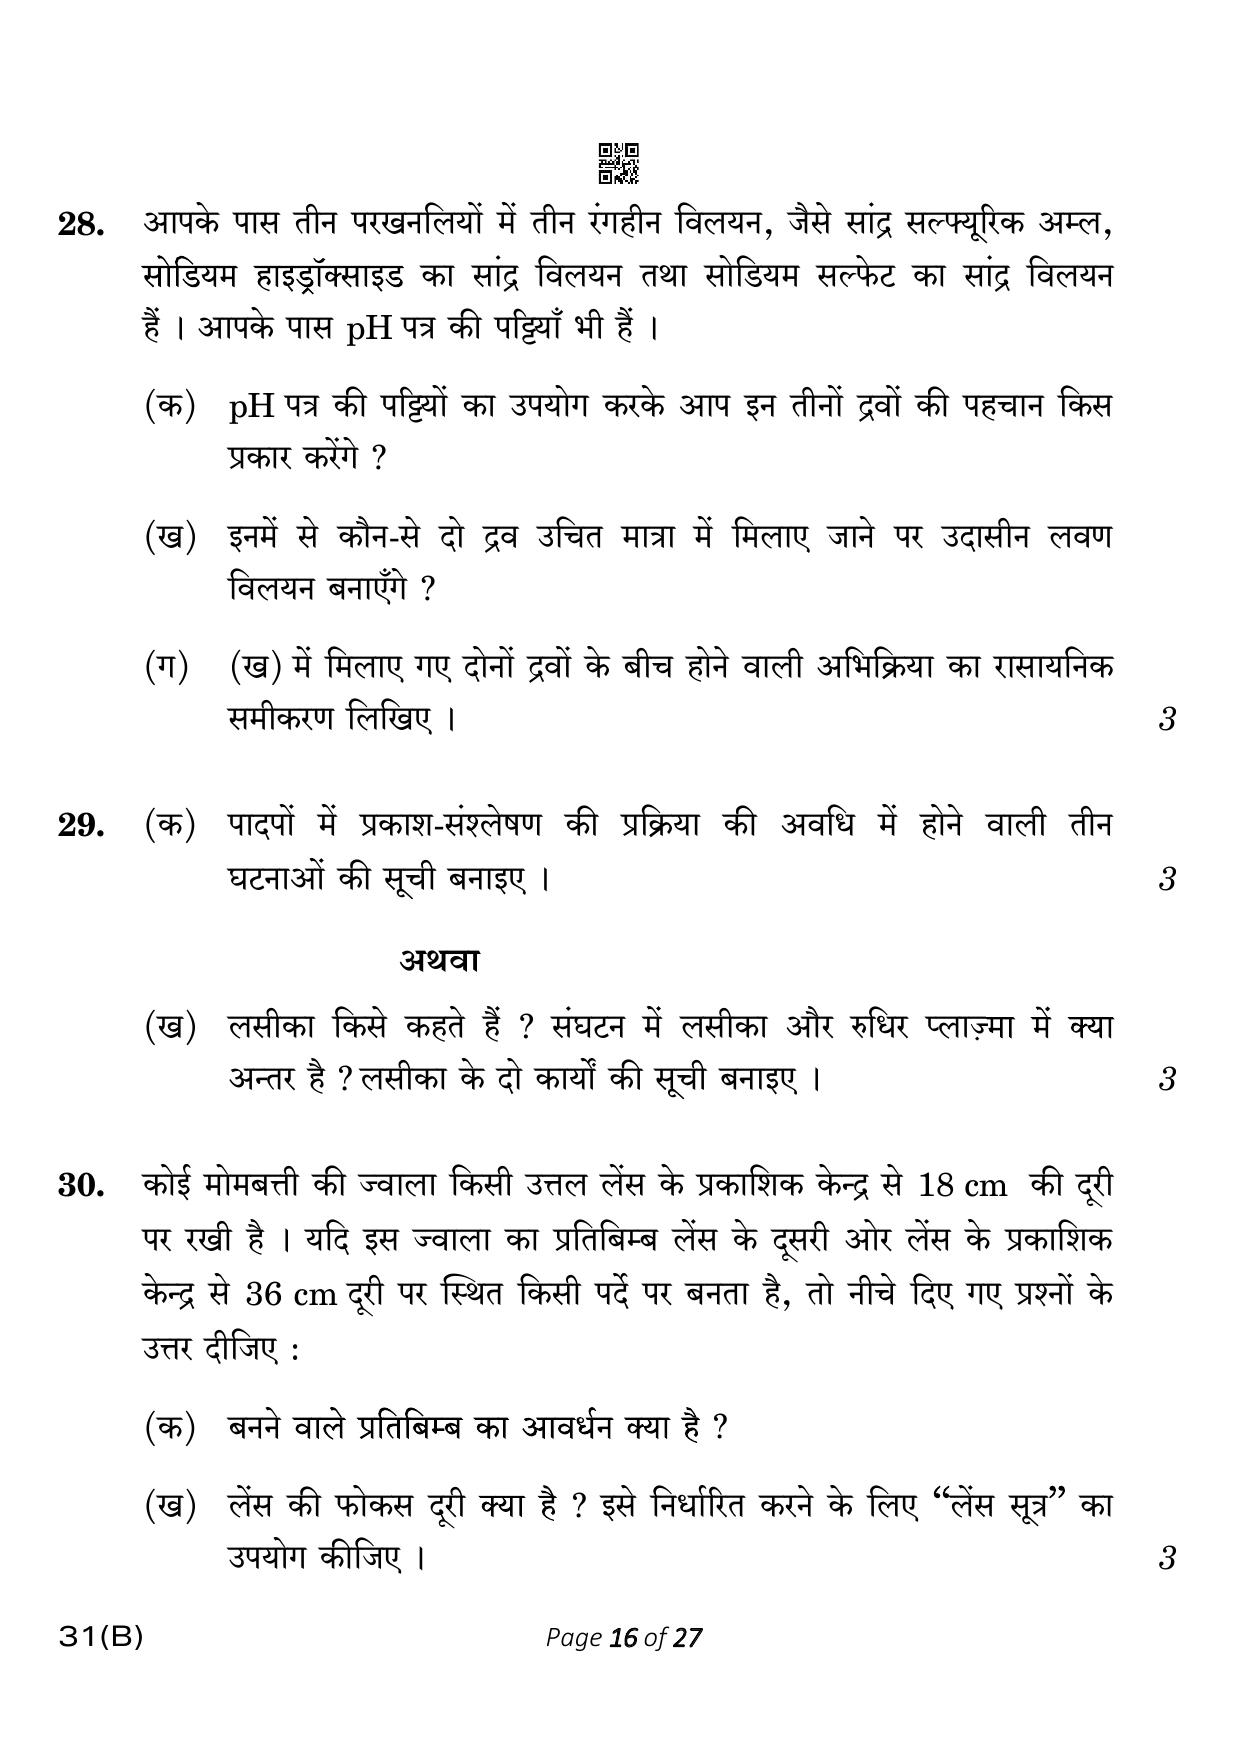 CBSE Class 10 31-B Science 2023 (Compartment) Question Paper - Page 16